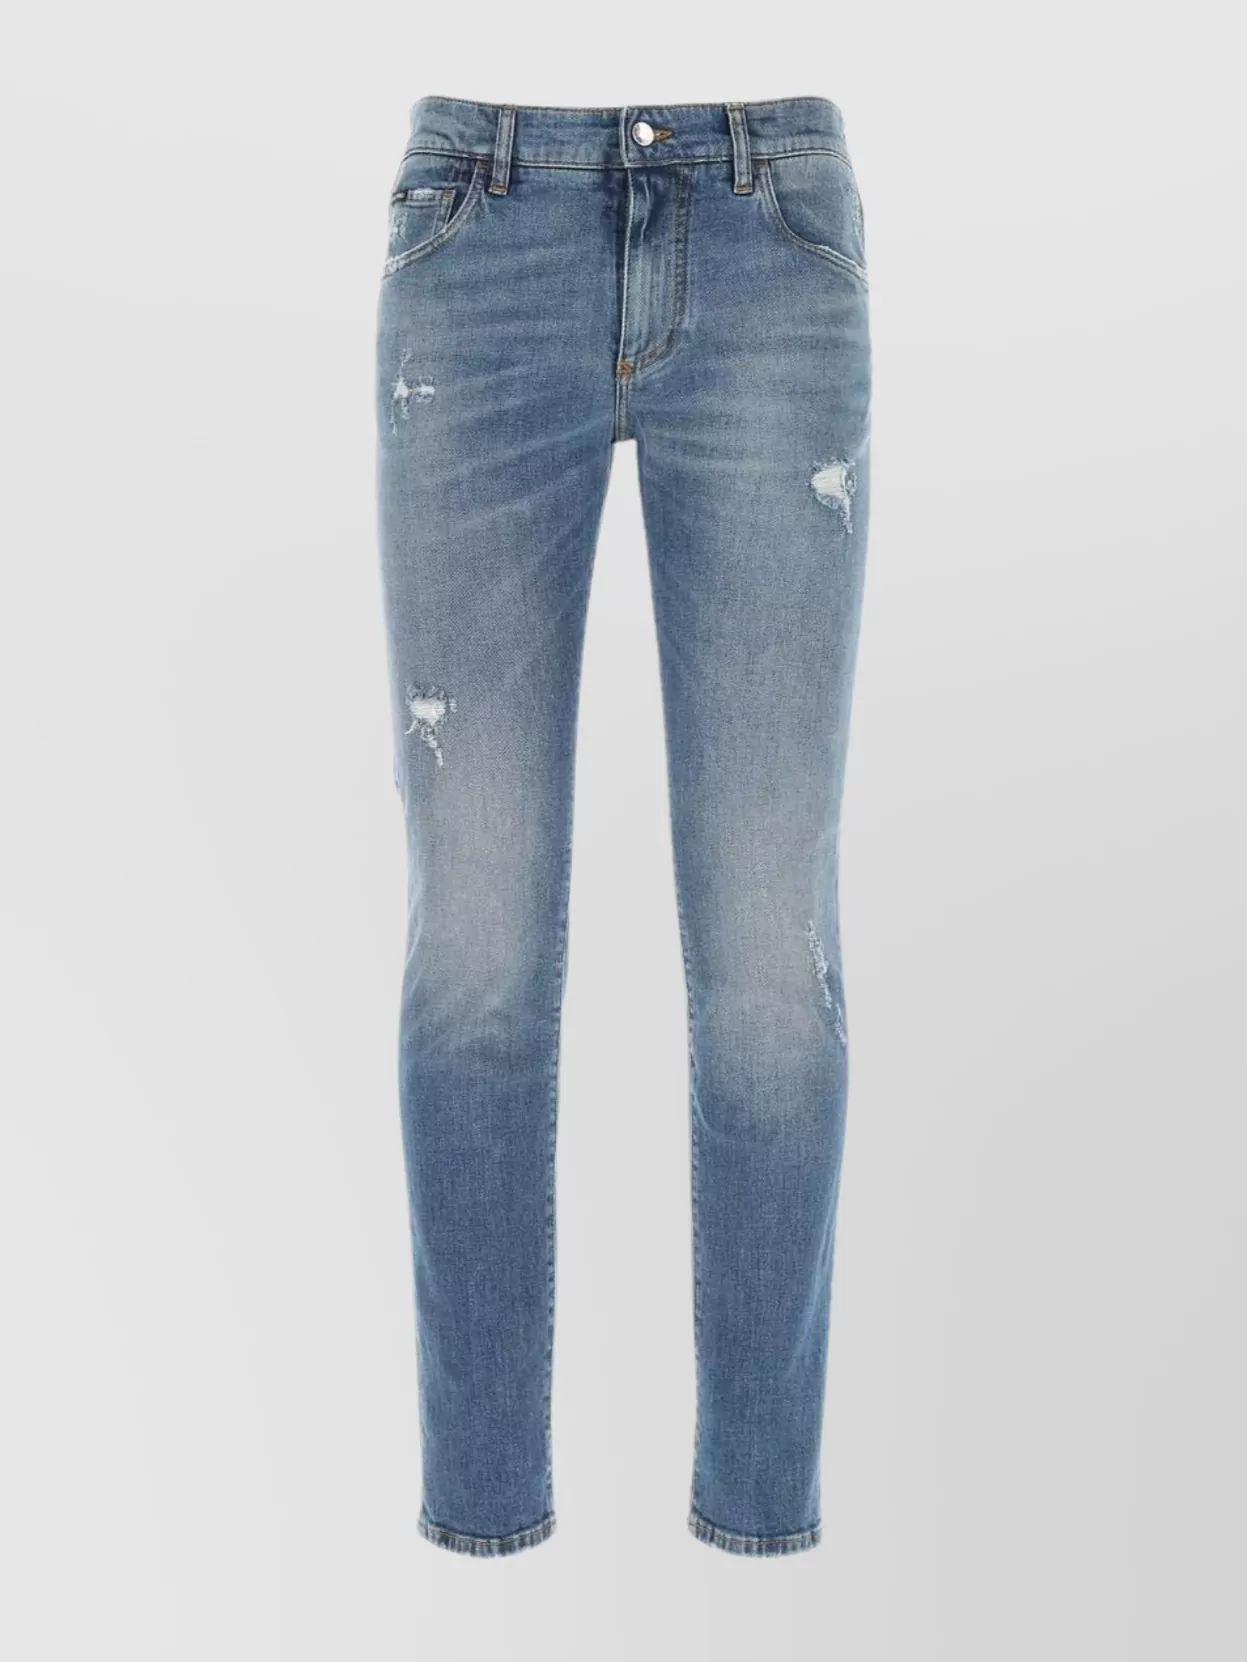 Dolce & Gabbana Cropped Length Stretch Denim Jeans Distressed Detailing In Blue